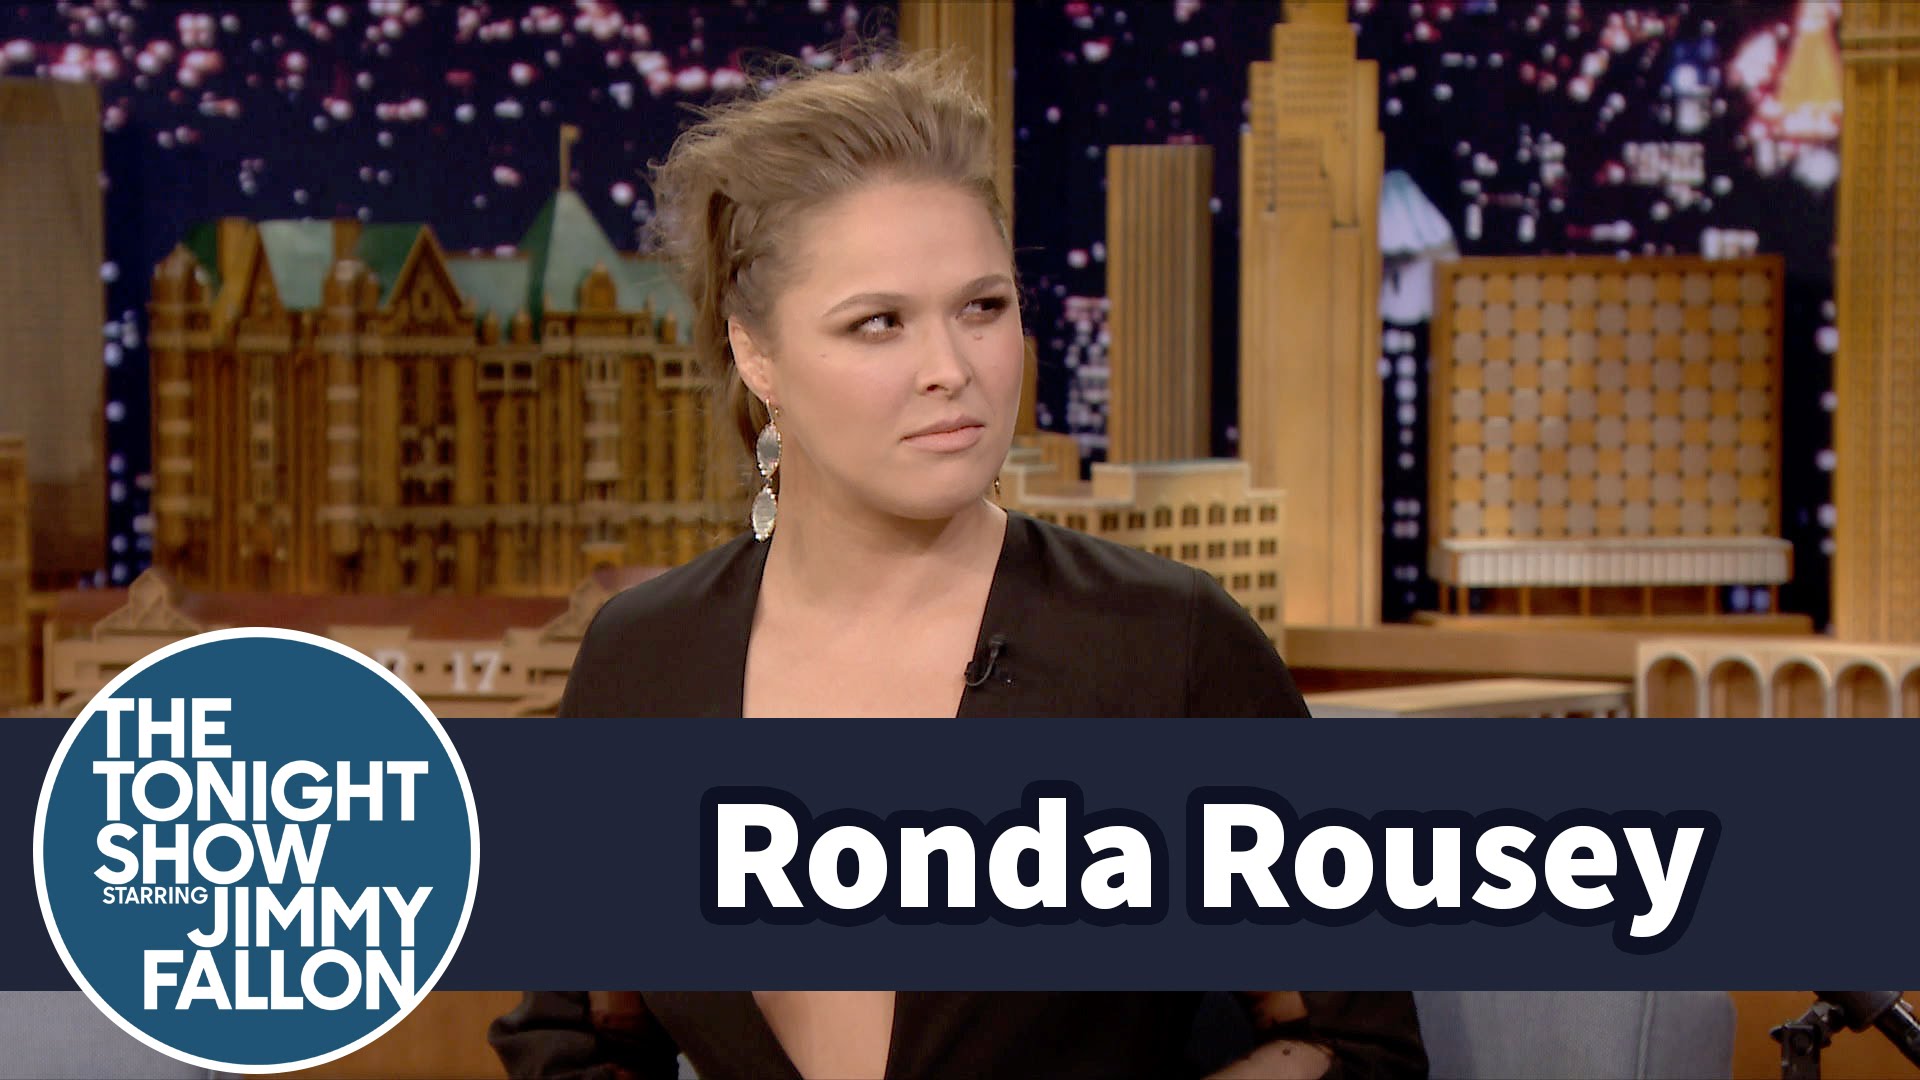 Ronda Rousey predicted her defeat to Holly Holm